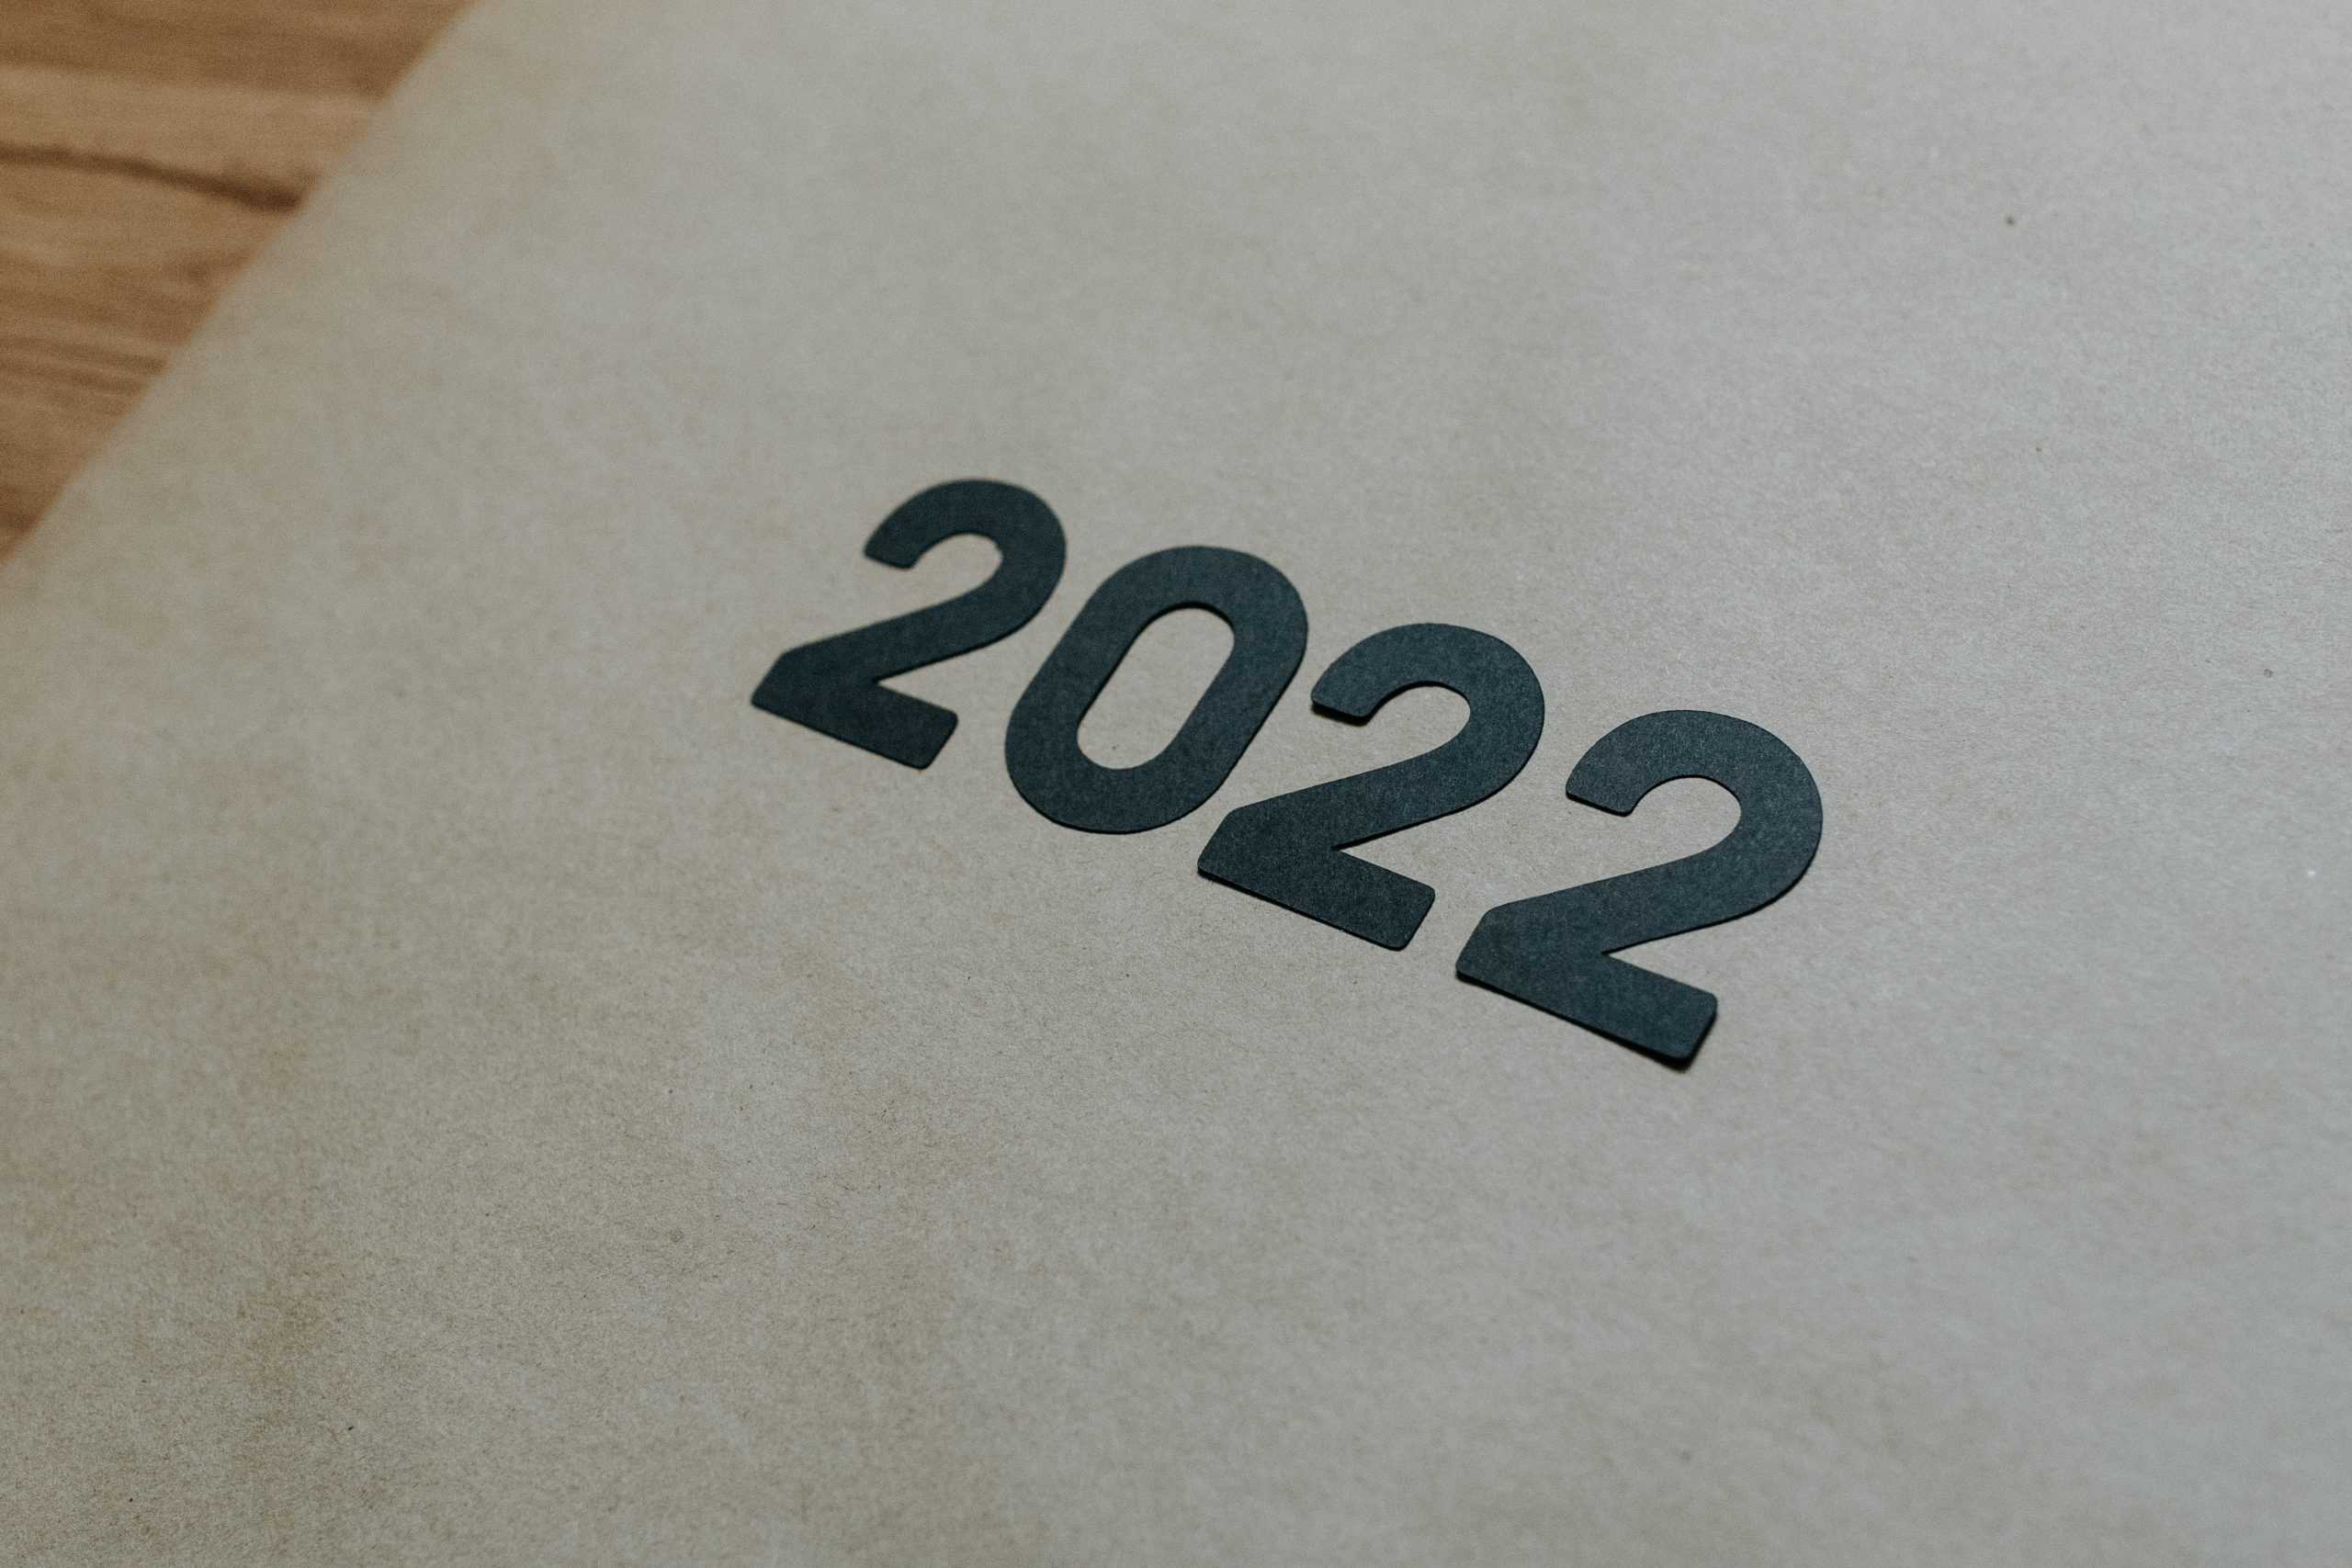 Picture of 2022 written on paper.